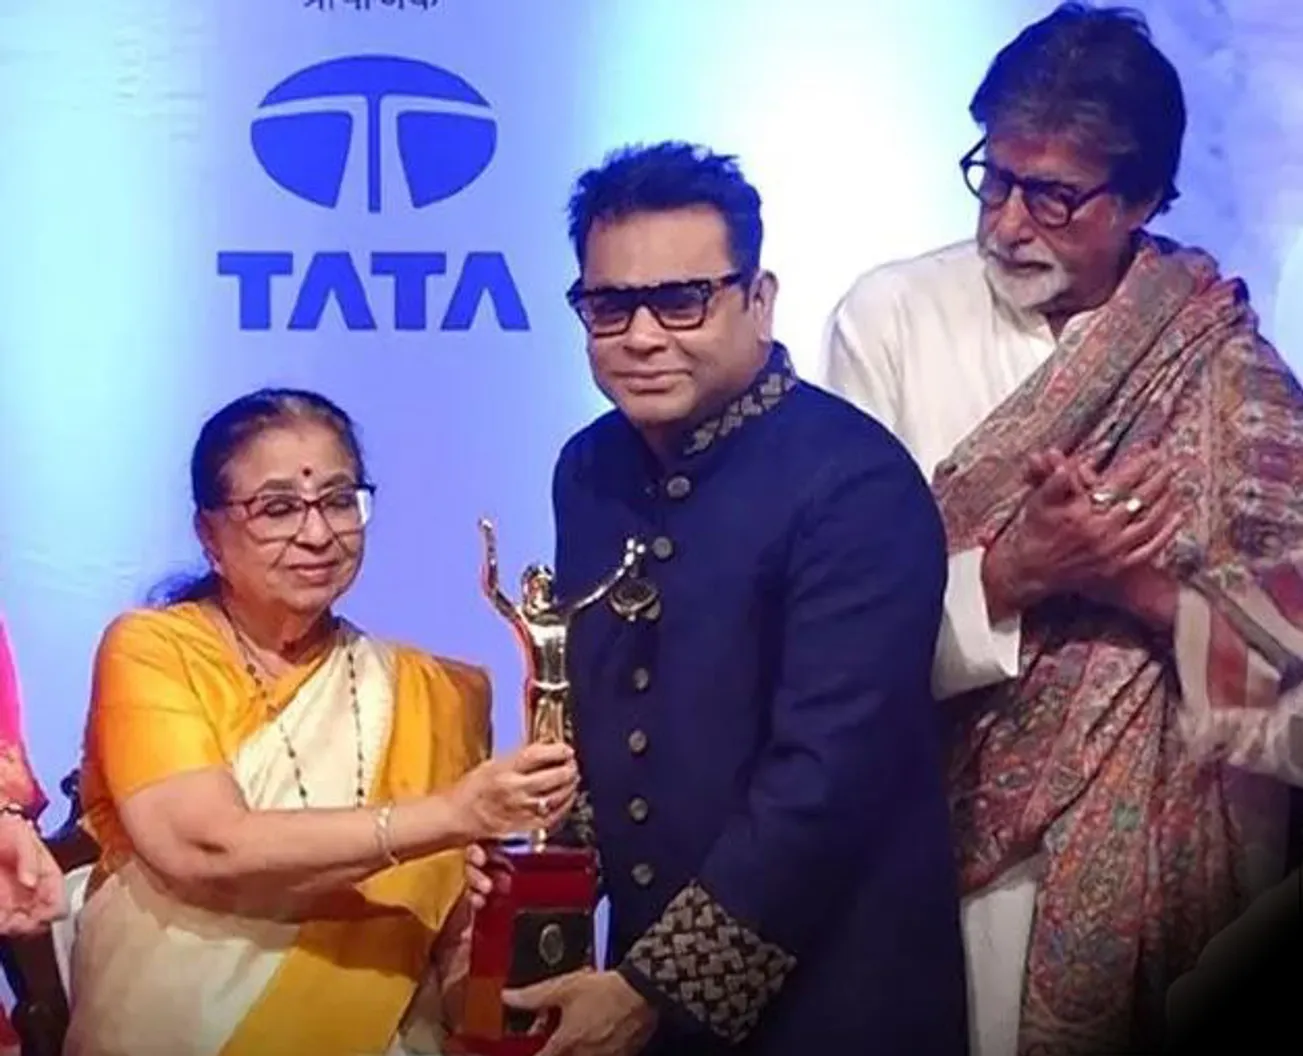 On the occasion of receiving this honor, Rehman said that he has always been inspired by the Mangeshkar family and he tells the same to his children.